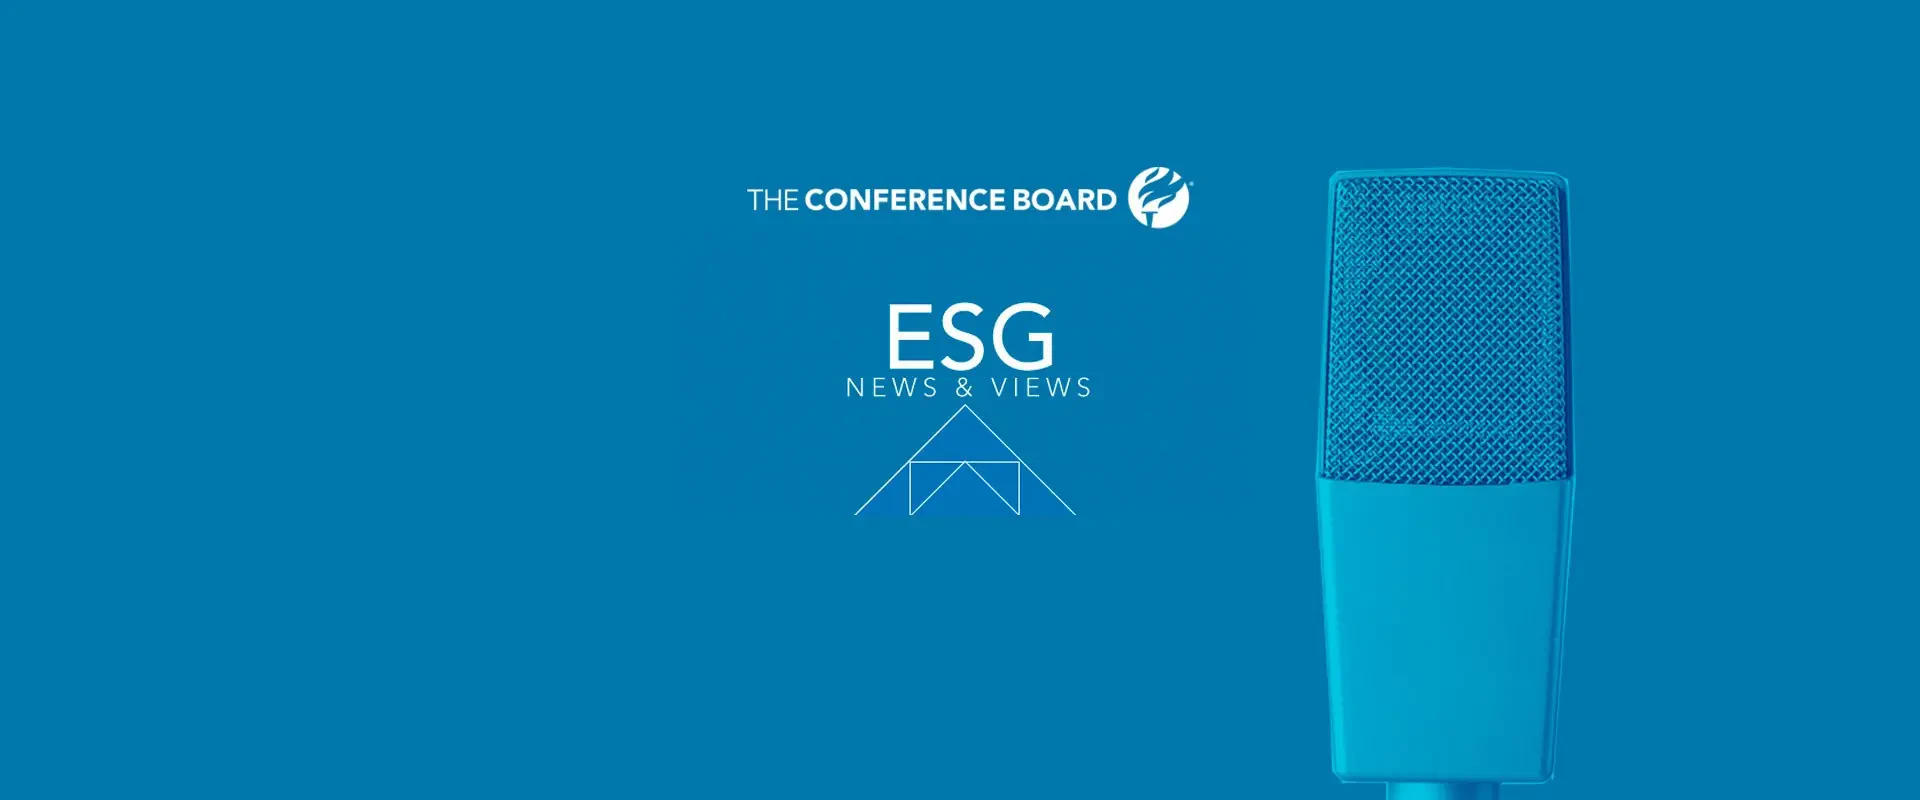 The Conference Board ESG Center Podcast with John Wilcox